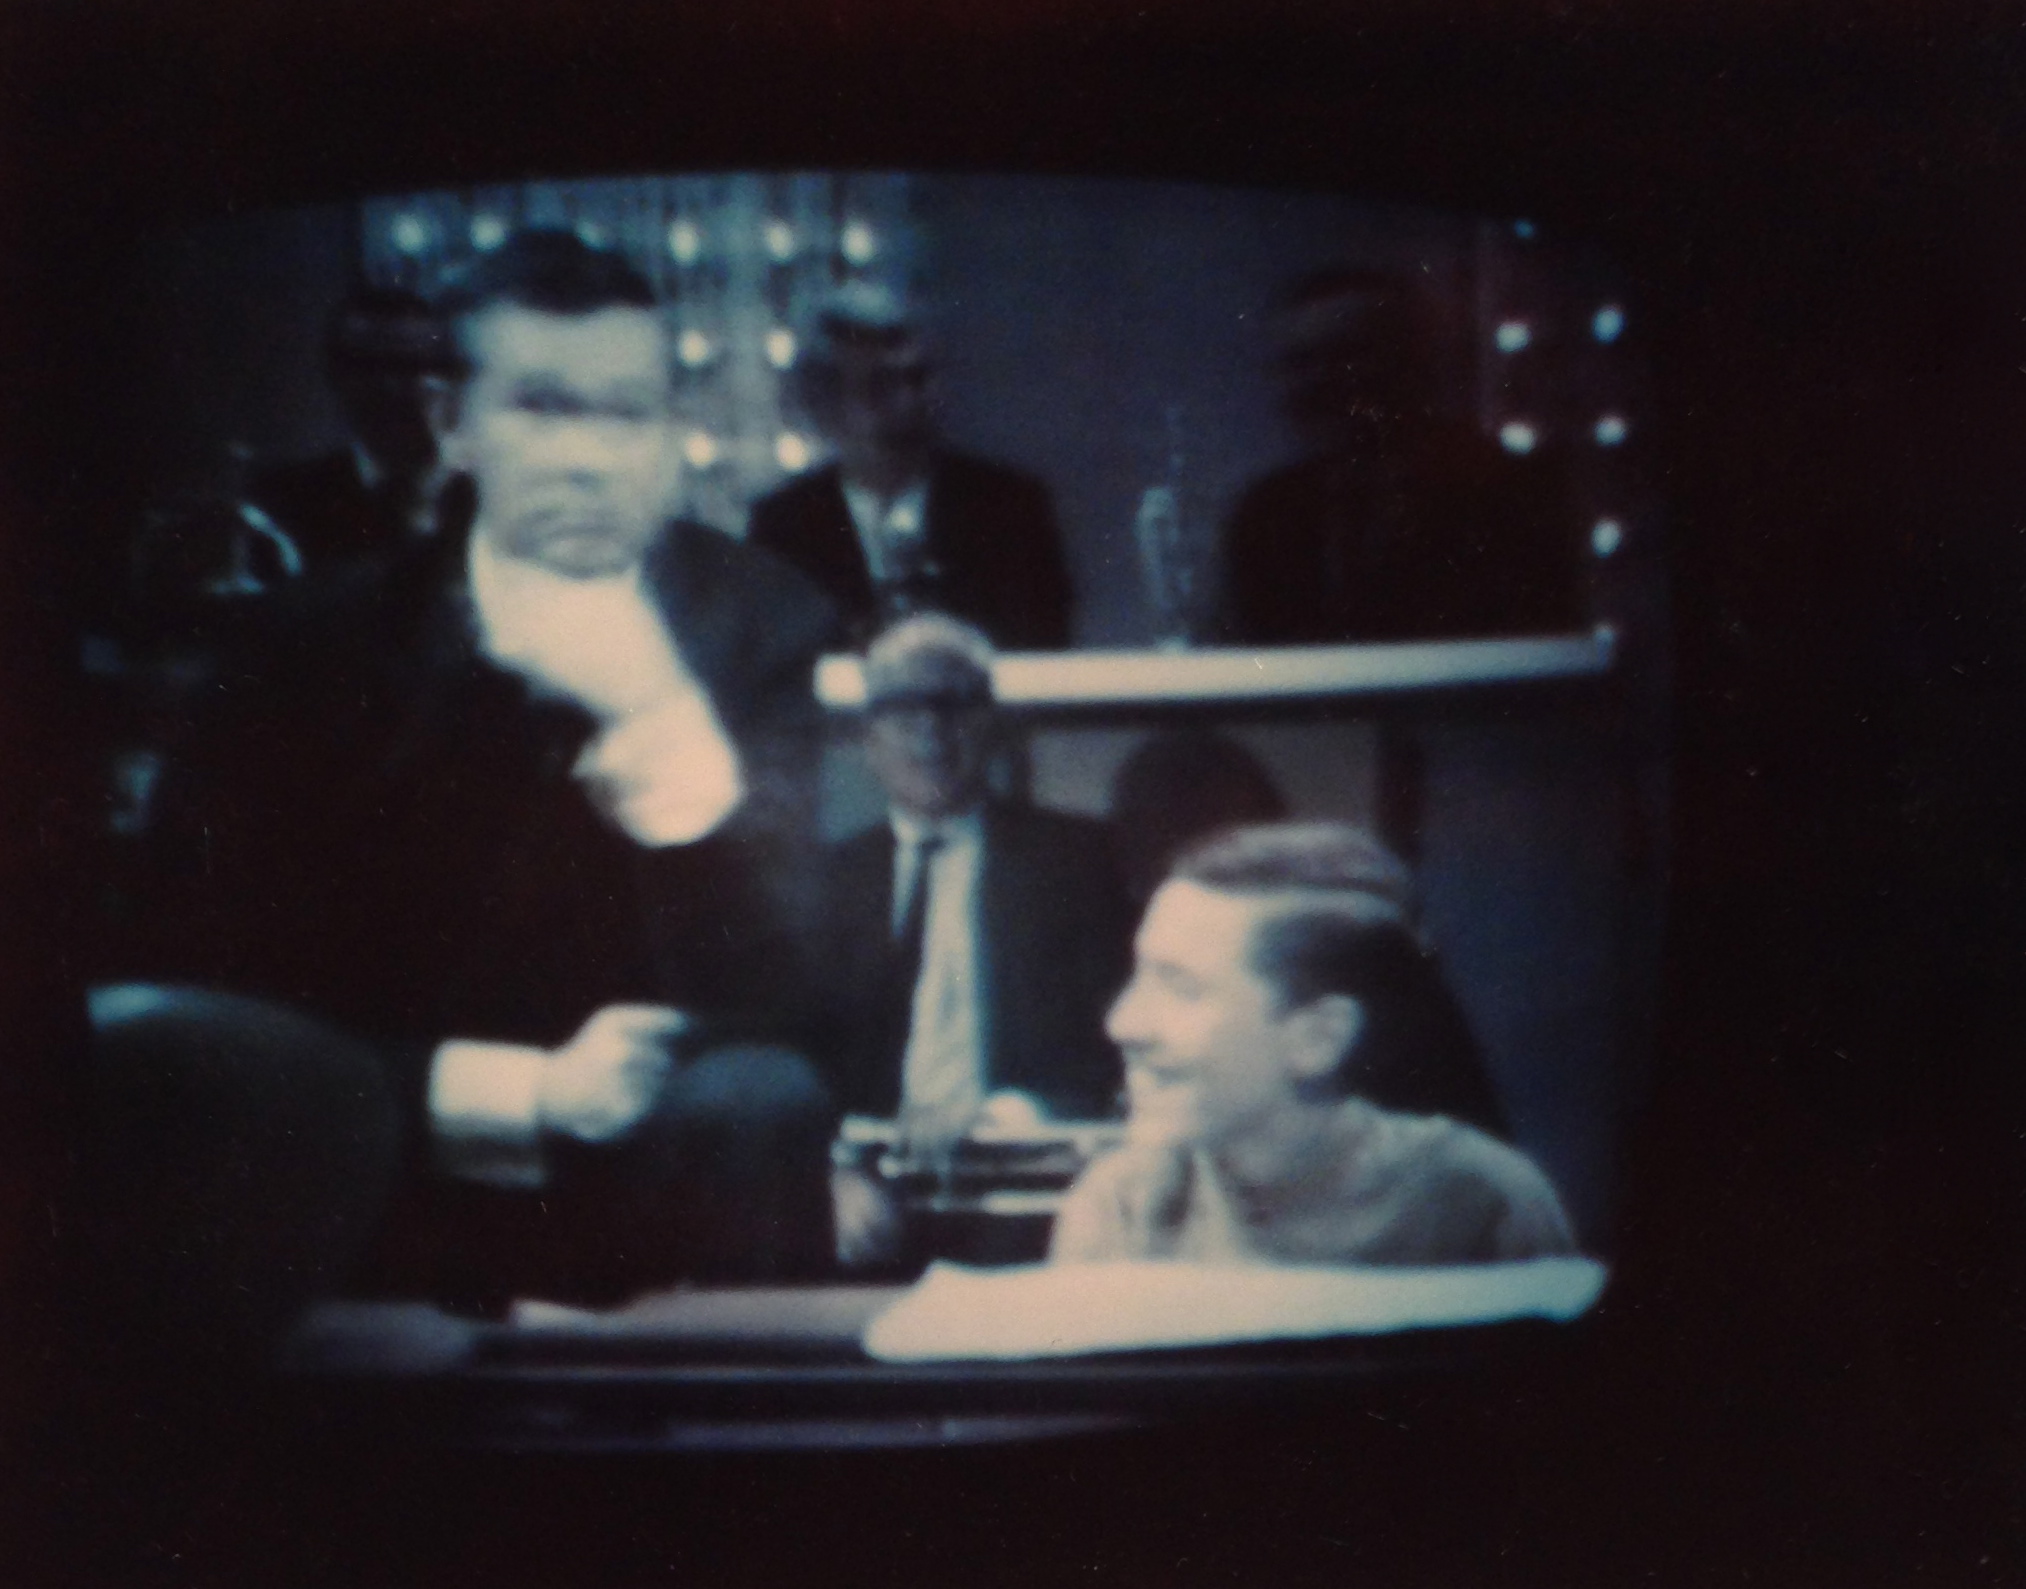 Craig playing on the Tonight Show with Johnny Carson